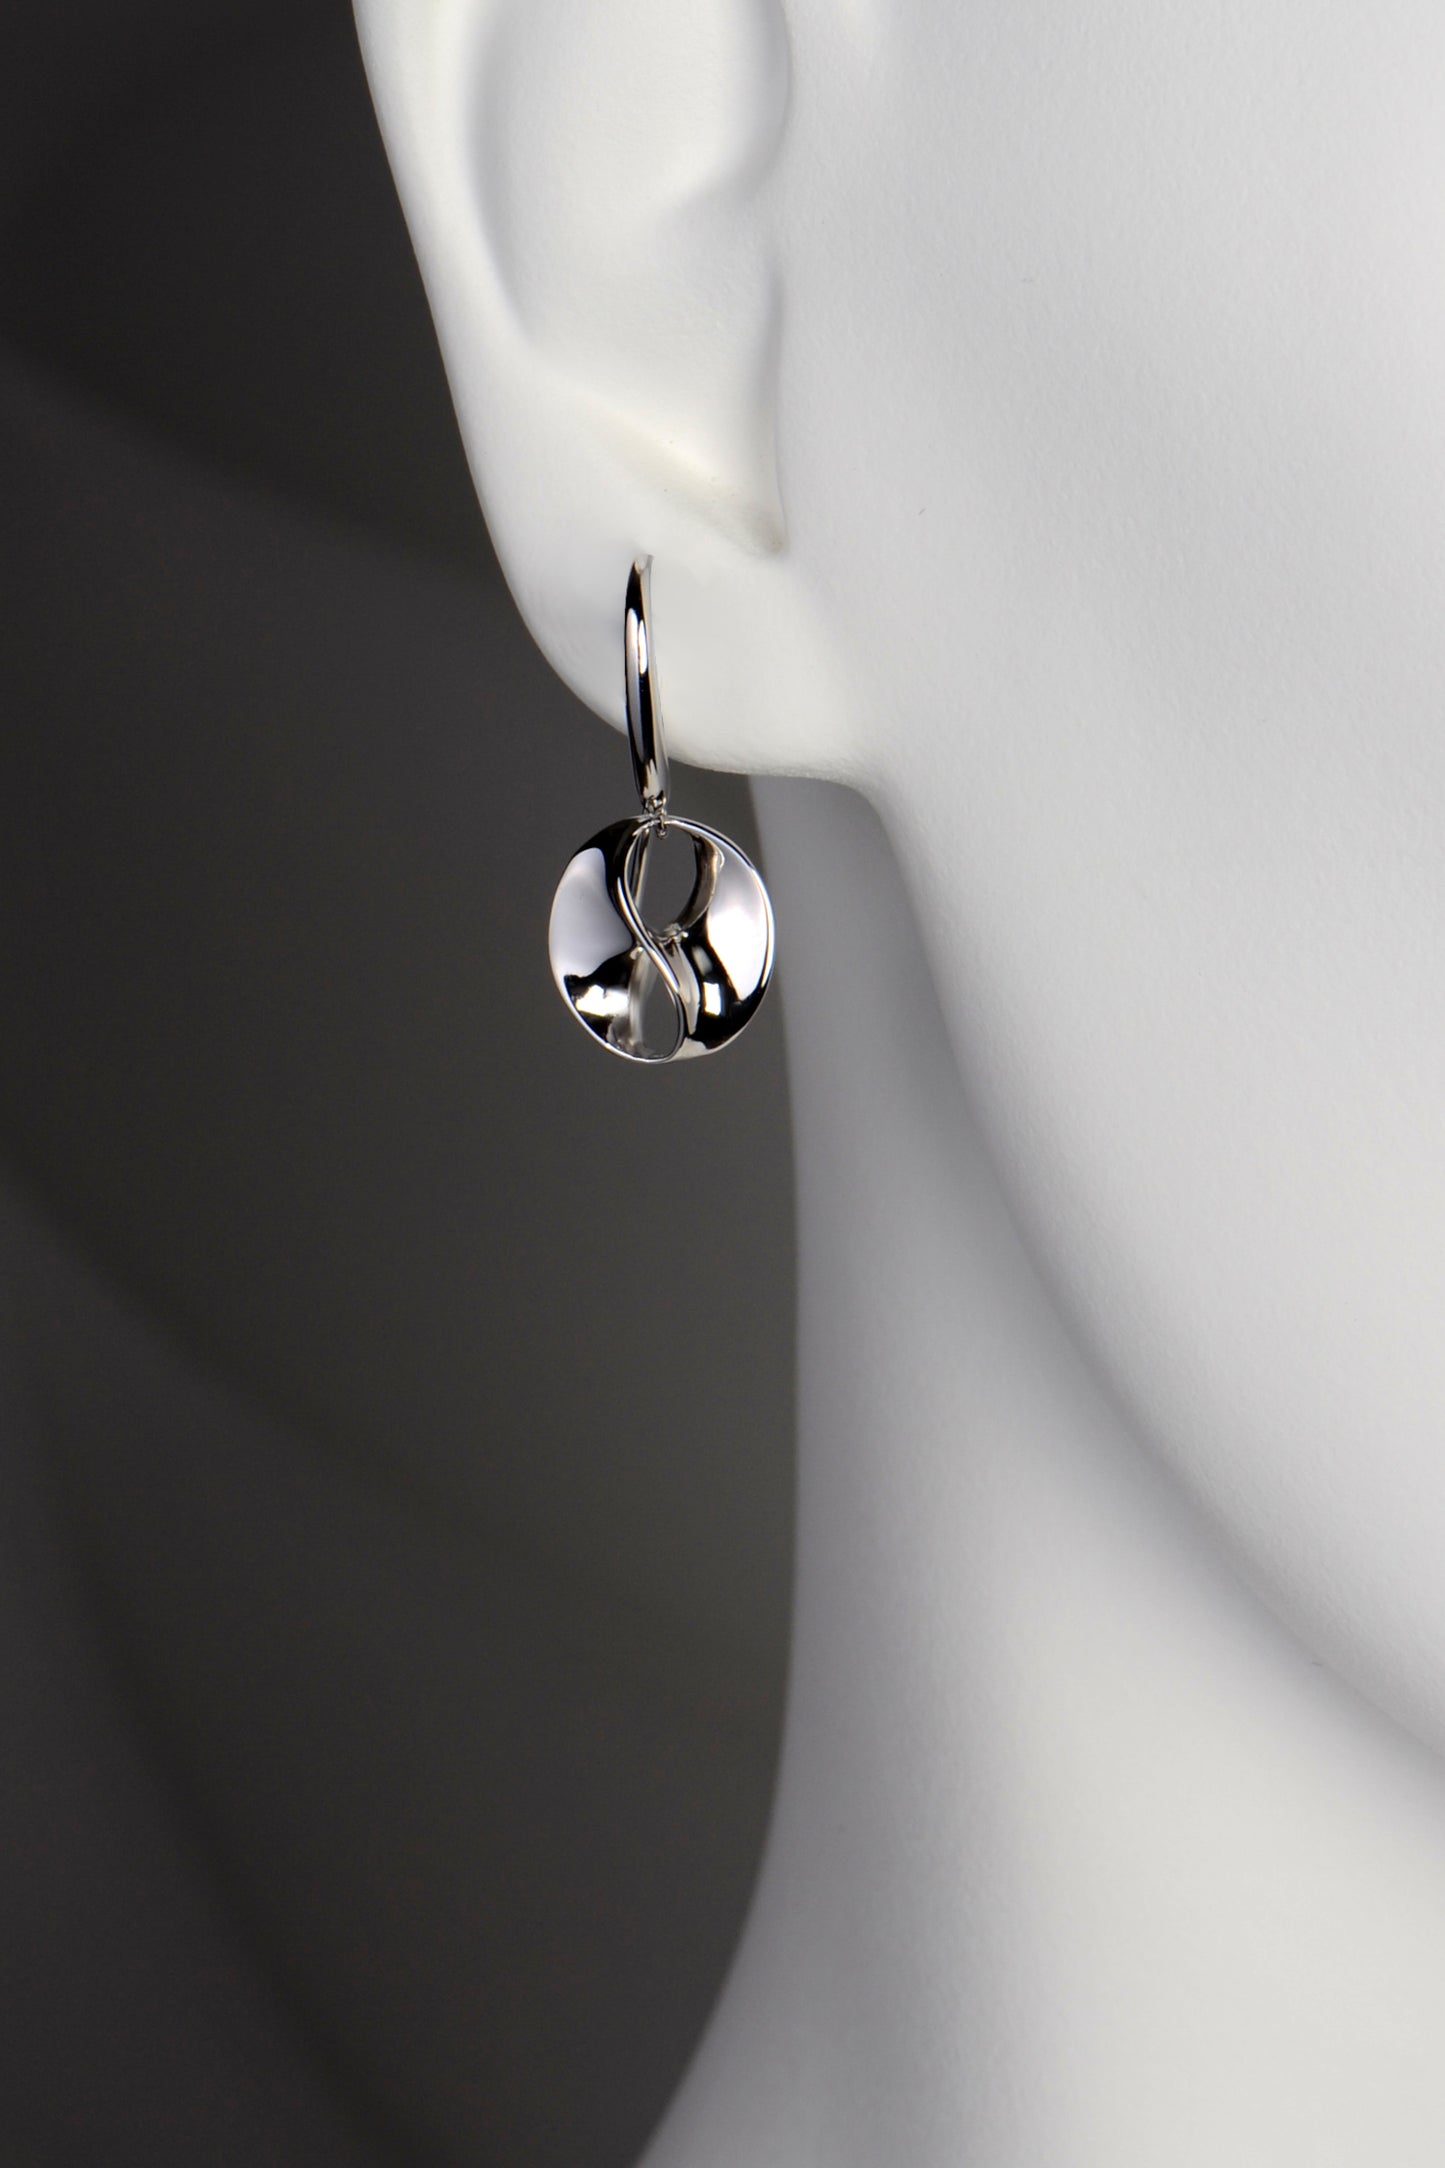 elegant designer earrings round drop from a hook fitting